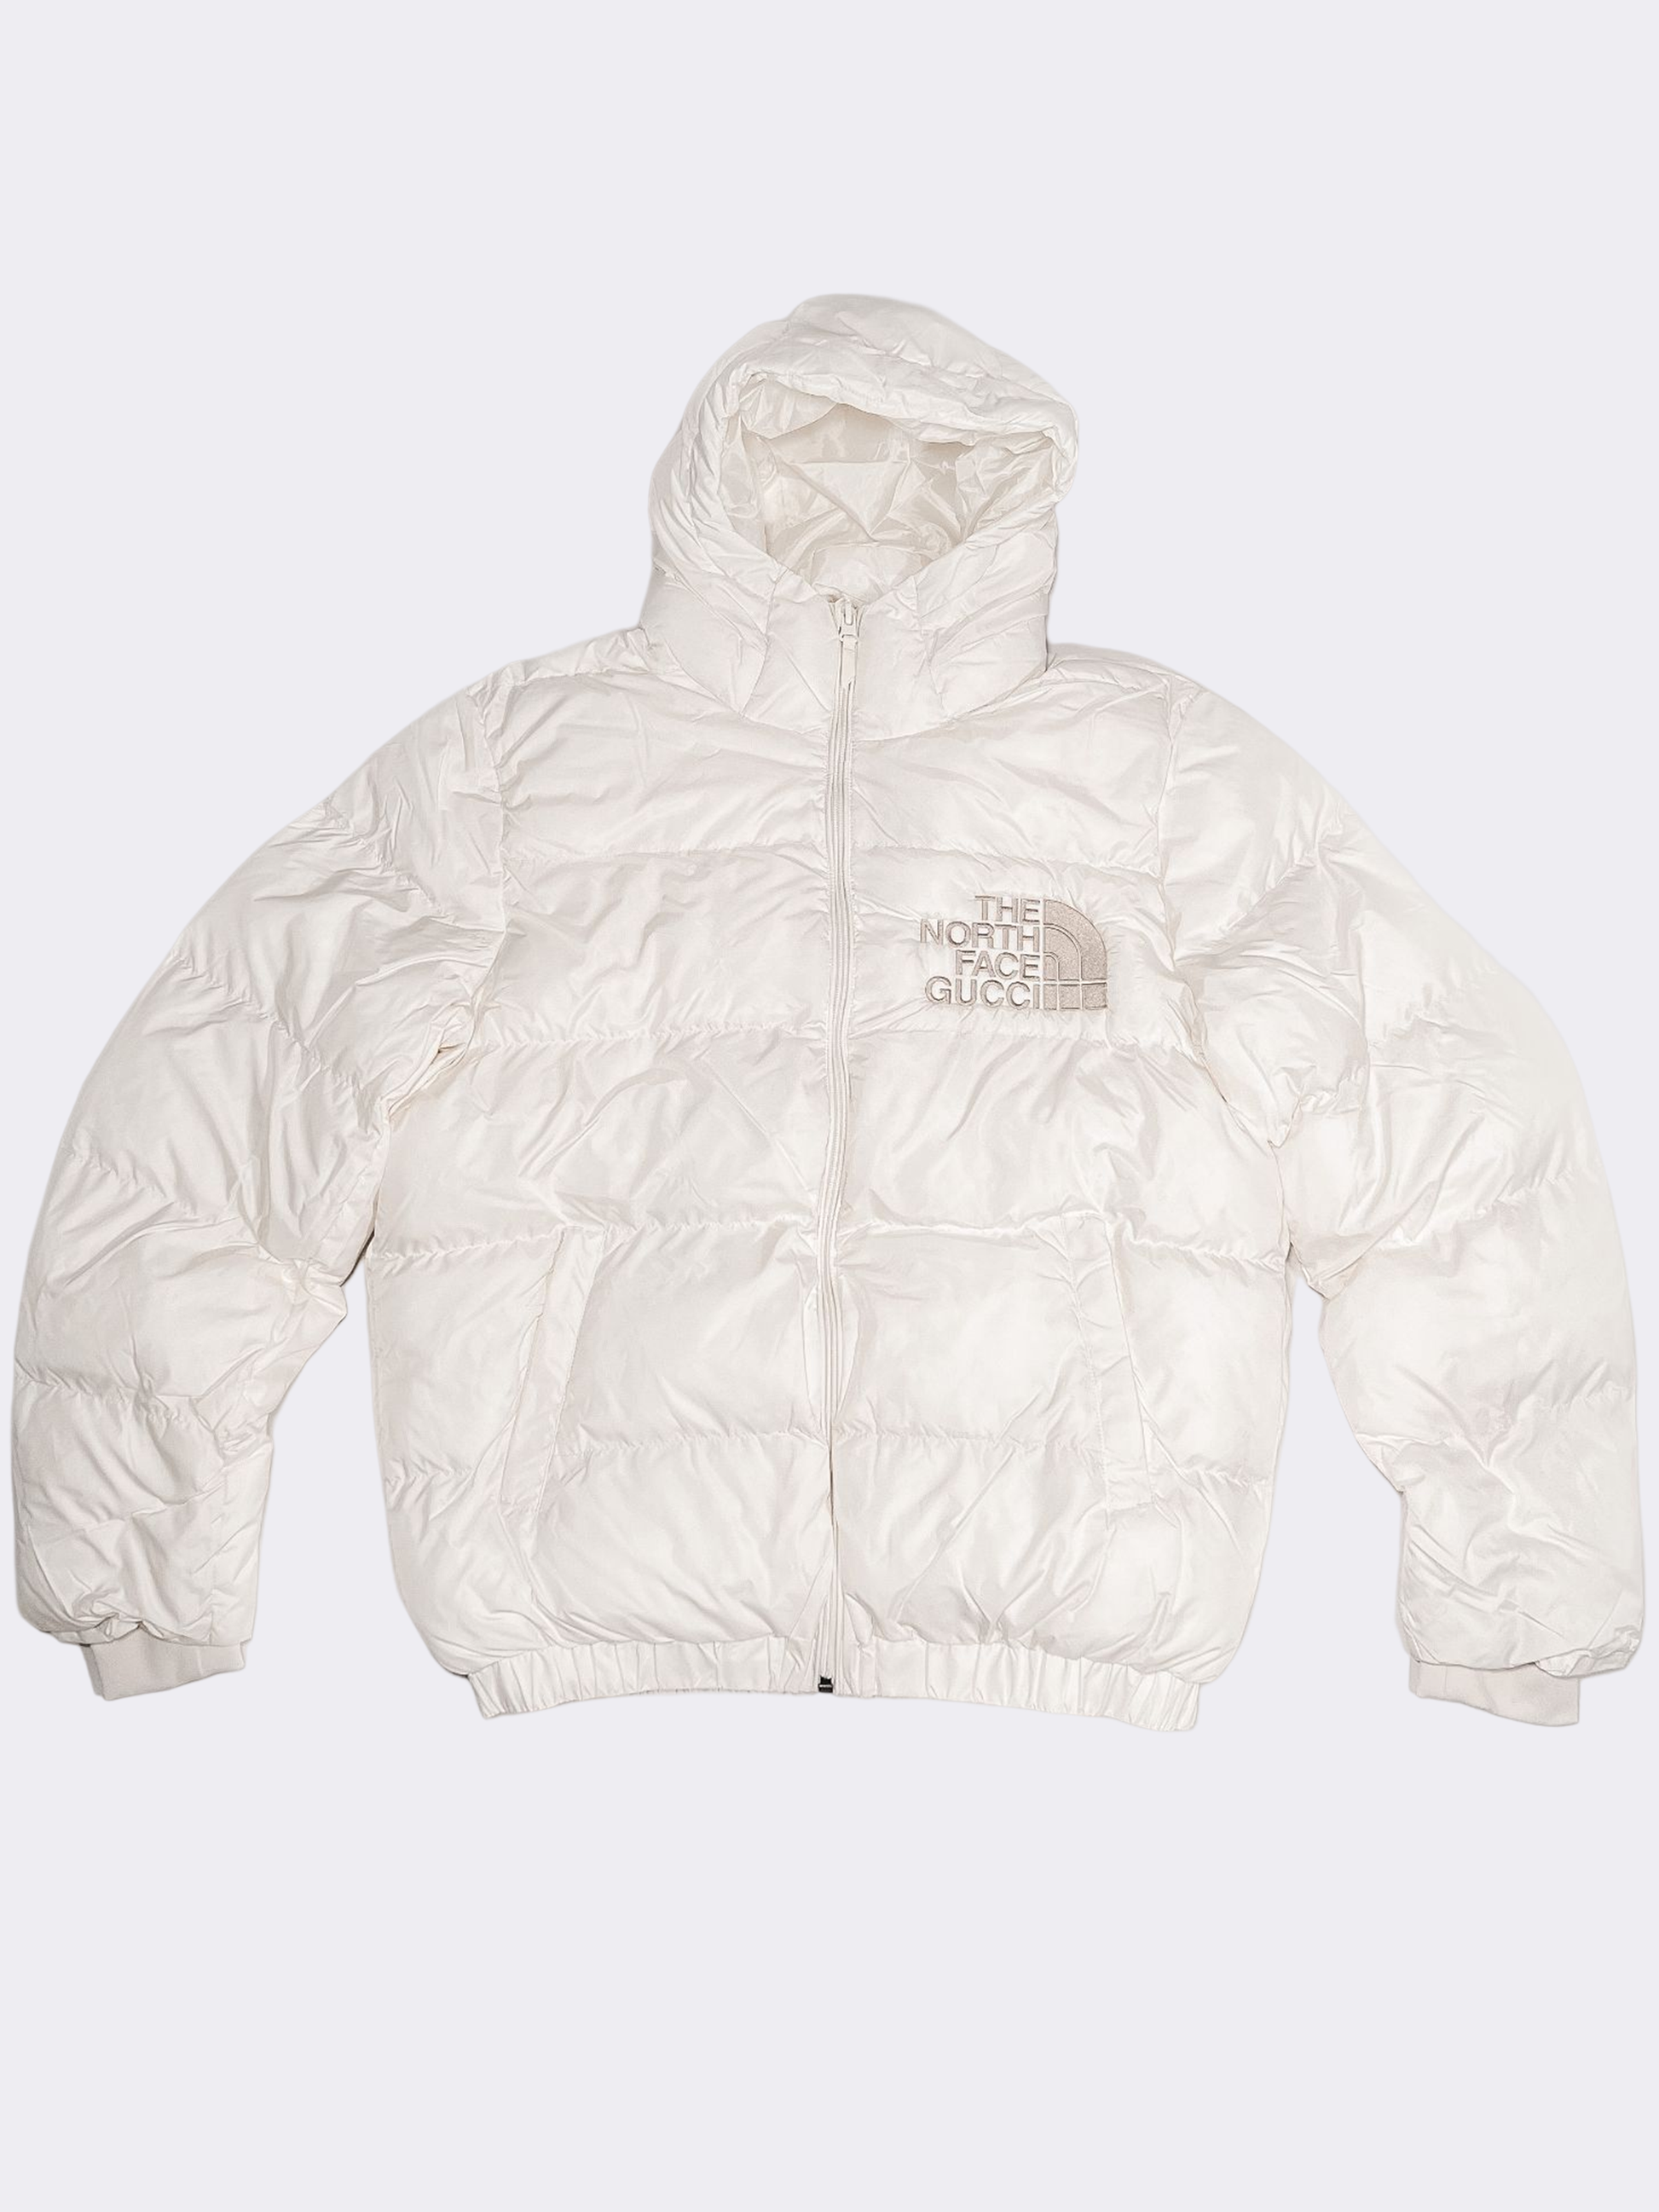 Premium Unisex Embroidered Puffer Jacket in Off White - Out The Purse UK